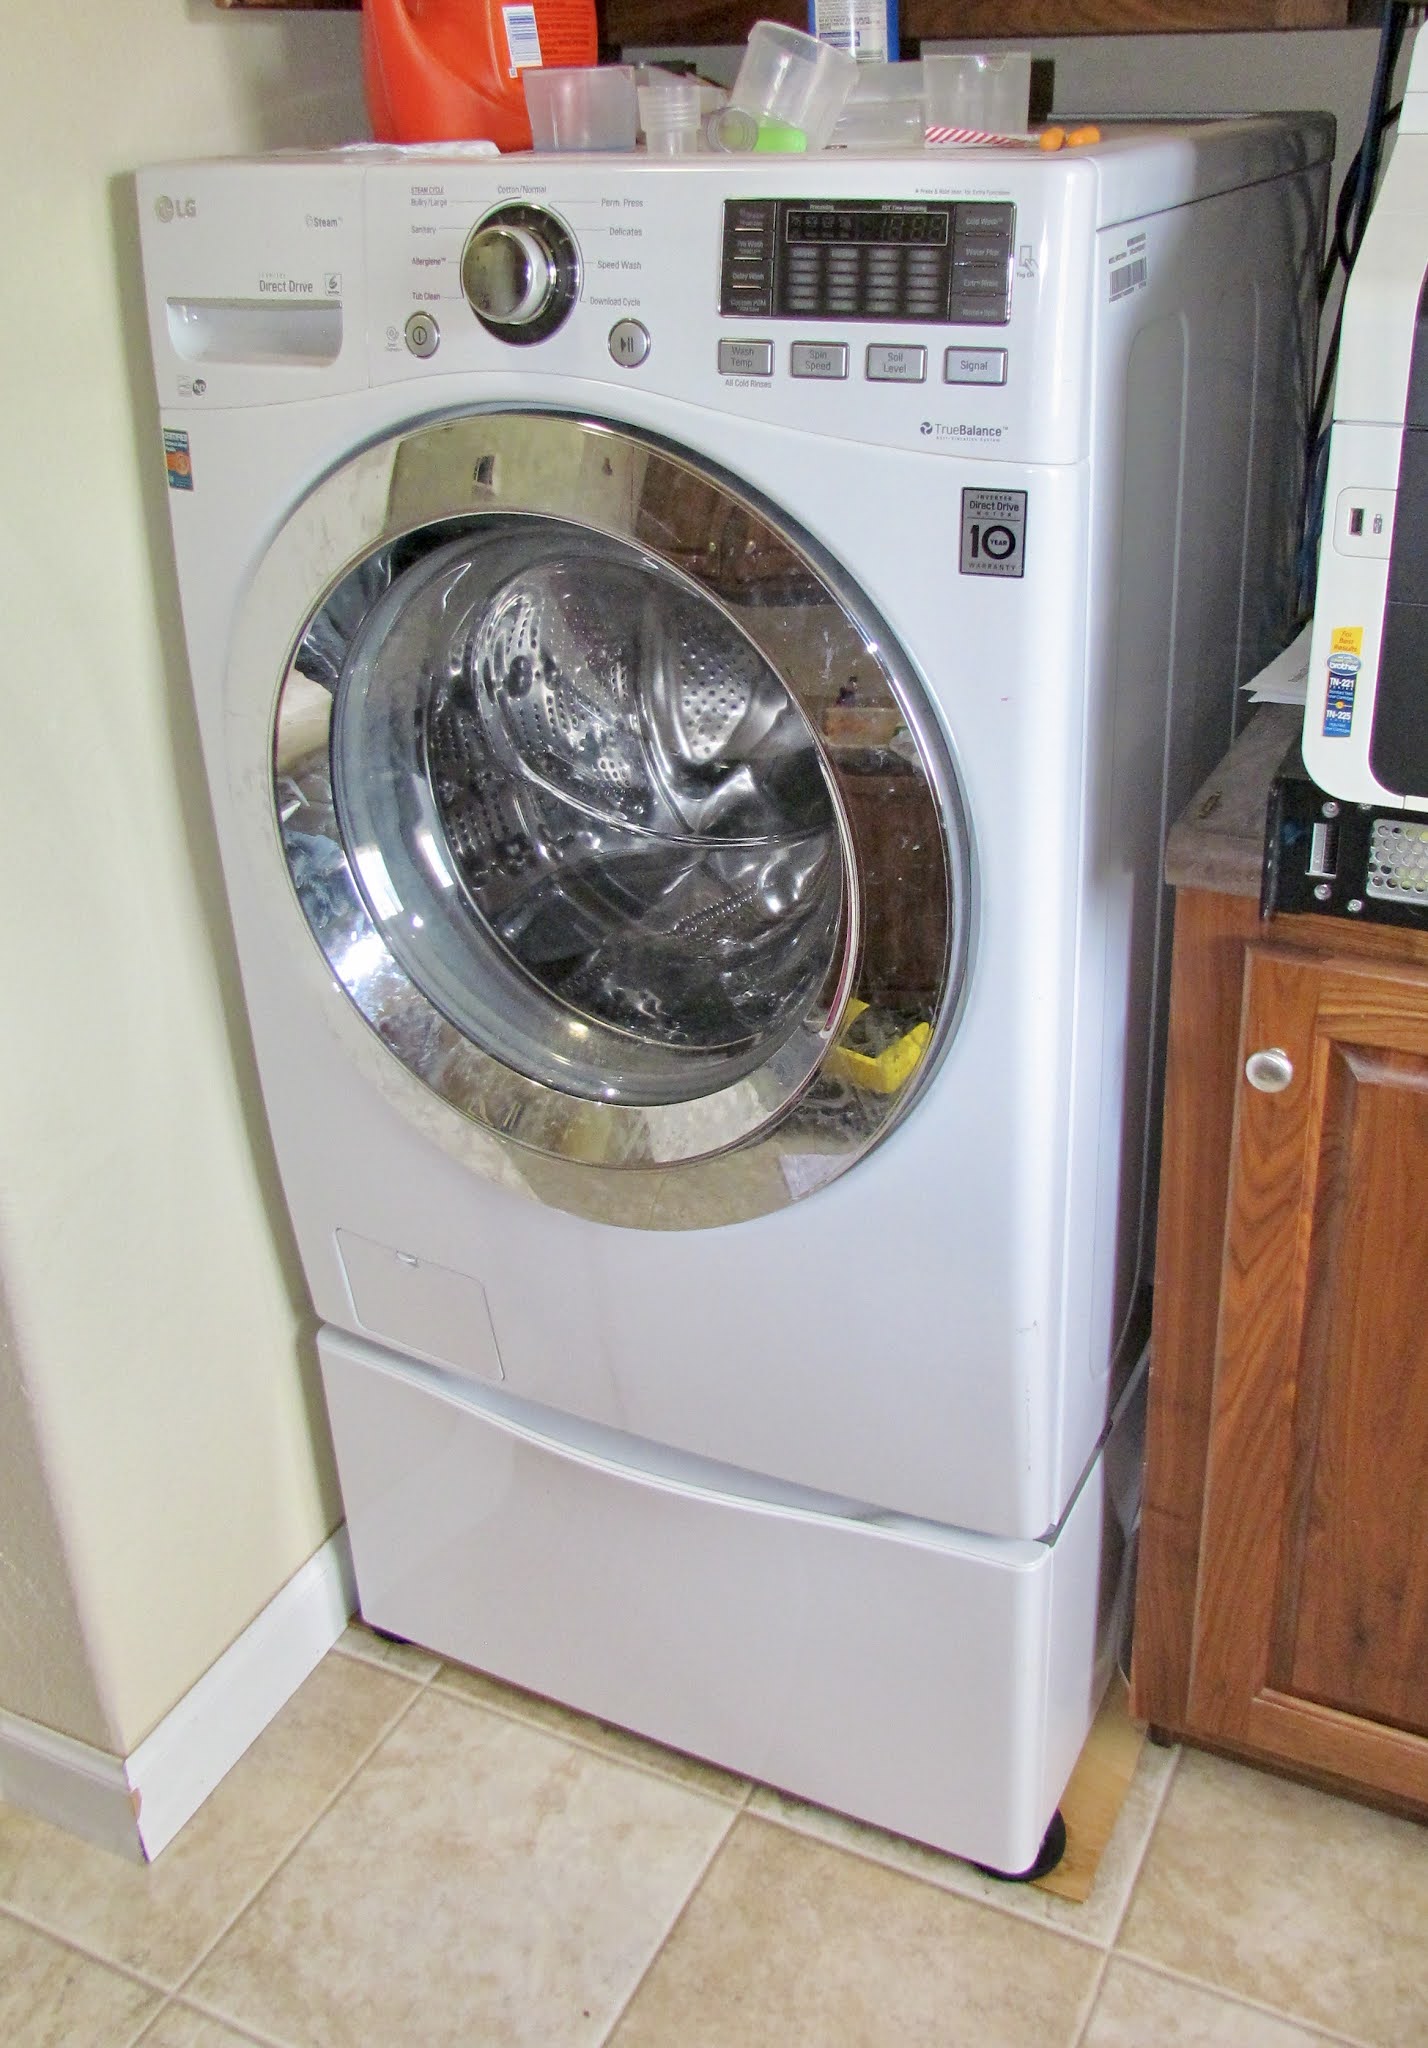 LG WM3575CV review: Not so fast: This speedy LG washer struggles